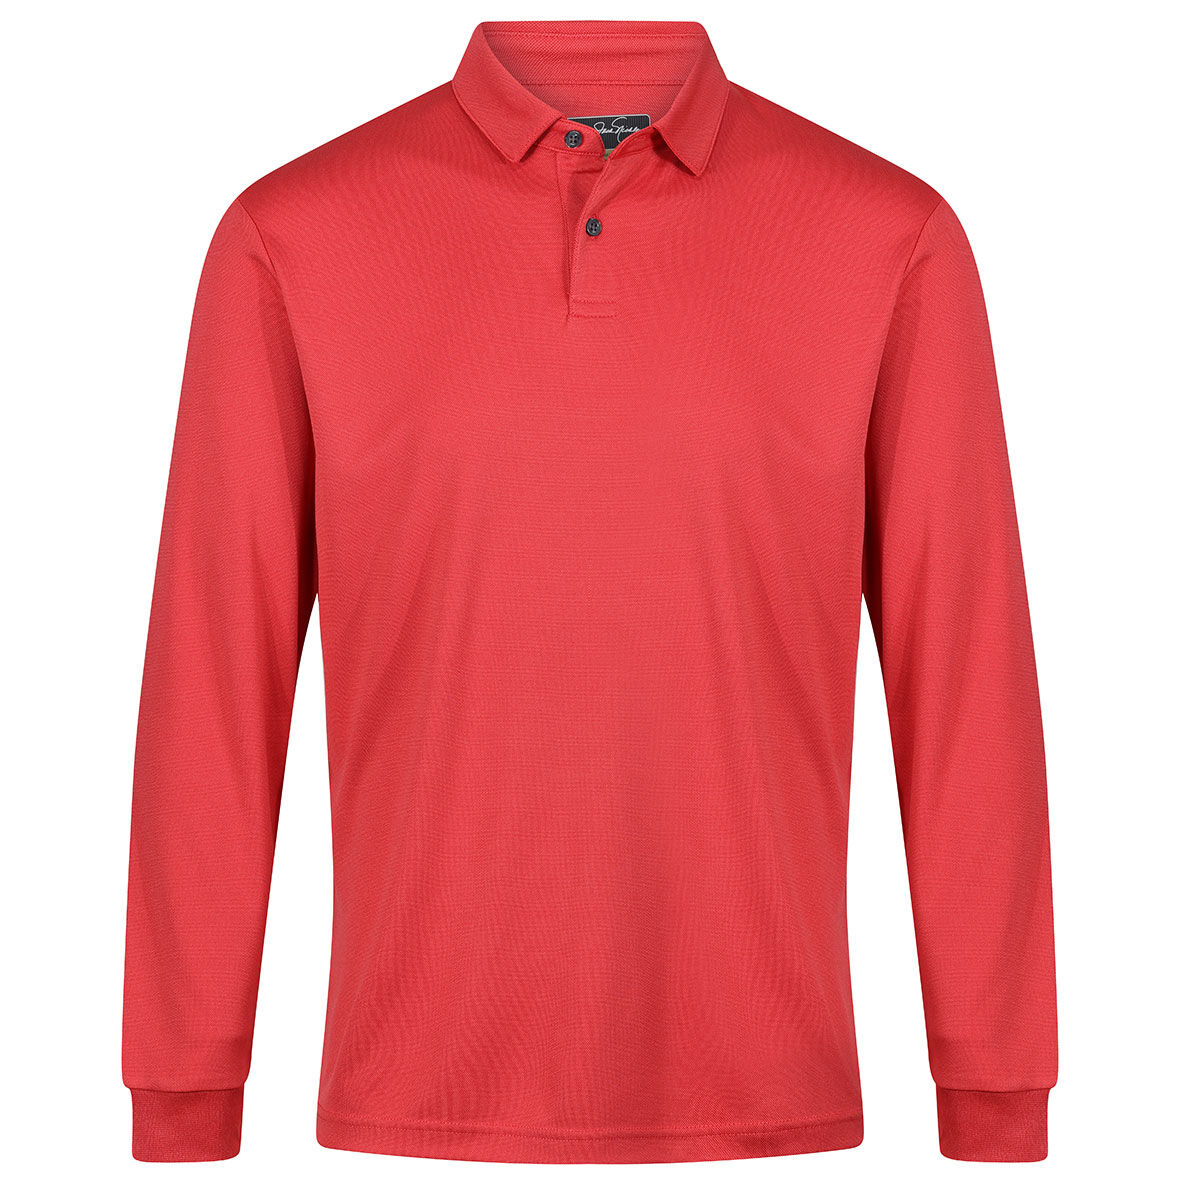 Jack Nicklaus Men's Classic Long Sleeve Golf Polo Shirt, Mens, Red, Small | American Golf von Jack Nicklaus